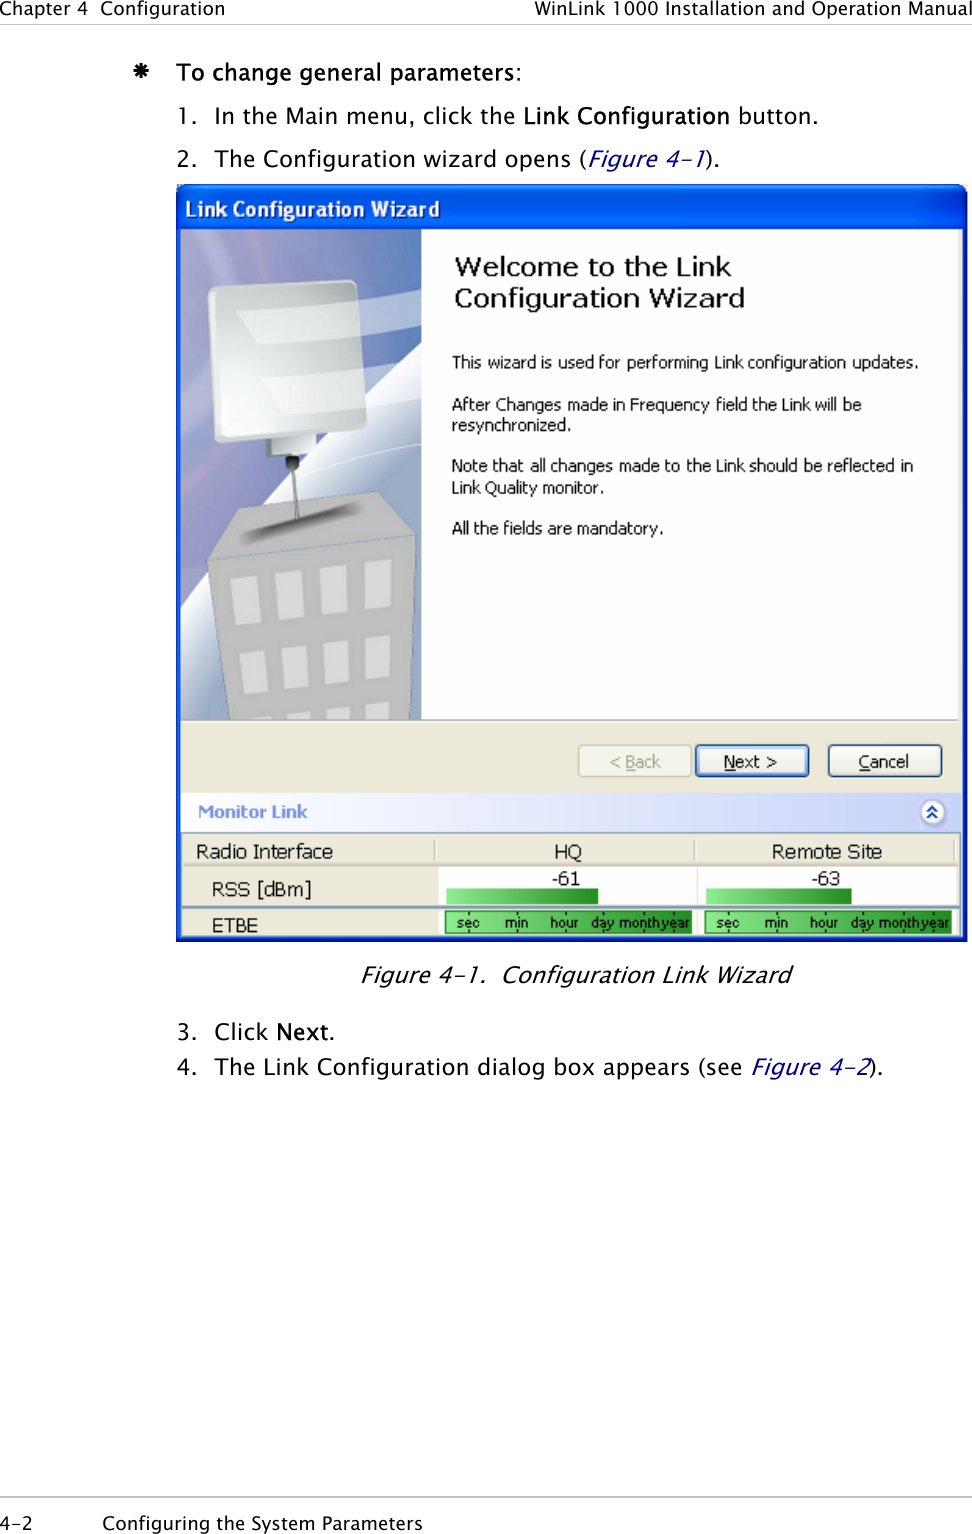 Chapter  4  Configuration  WinLink 1000 Installation and Operation Manual Æ To change general parameters: 1. In the Main menu, click the Link Configuration button. 2. The Configuration wizard opens (Figure 4-1).   Figure  4-1.  Configuration Link Wizard 3. Click Next. 4. The Link Configuration dialog box appears (see Figure  4-2). 4-2  Configuring the System Parameters  